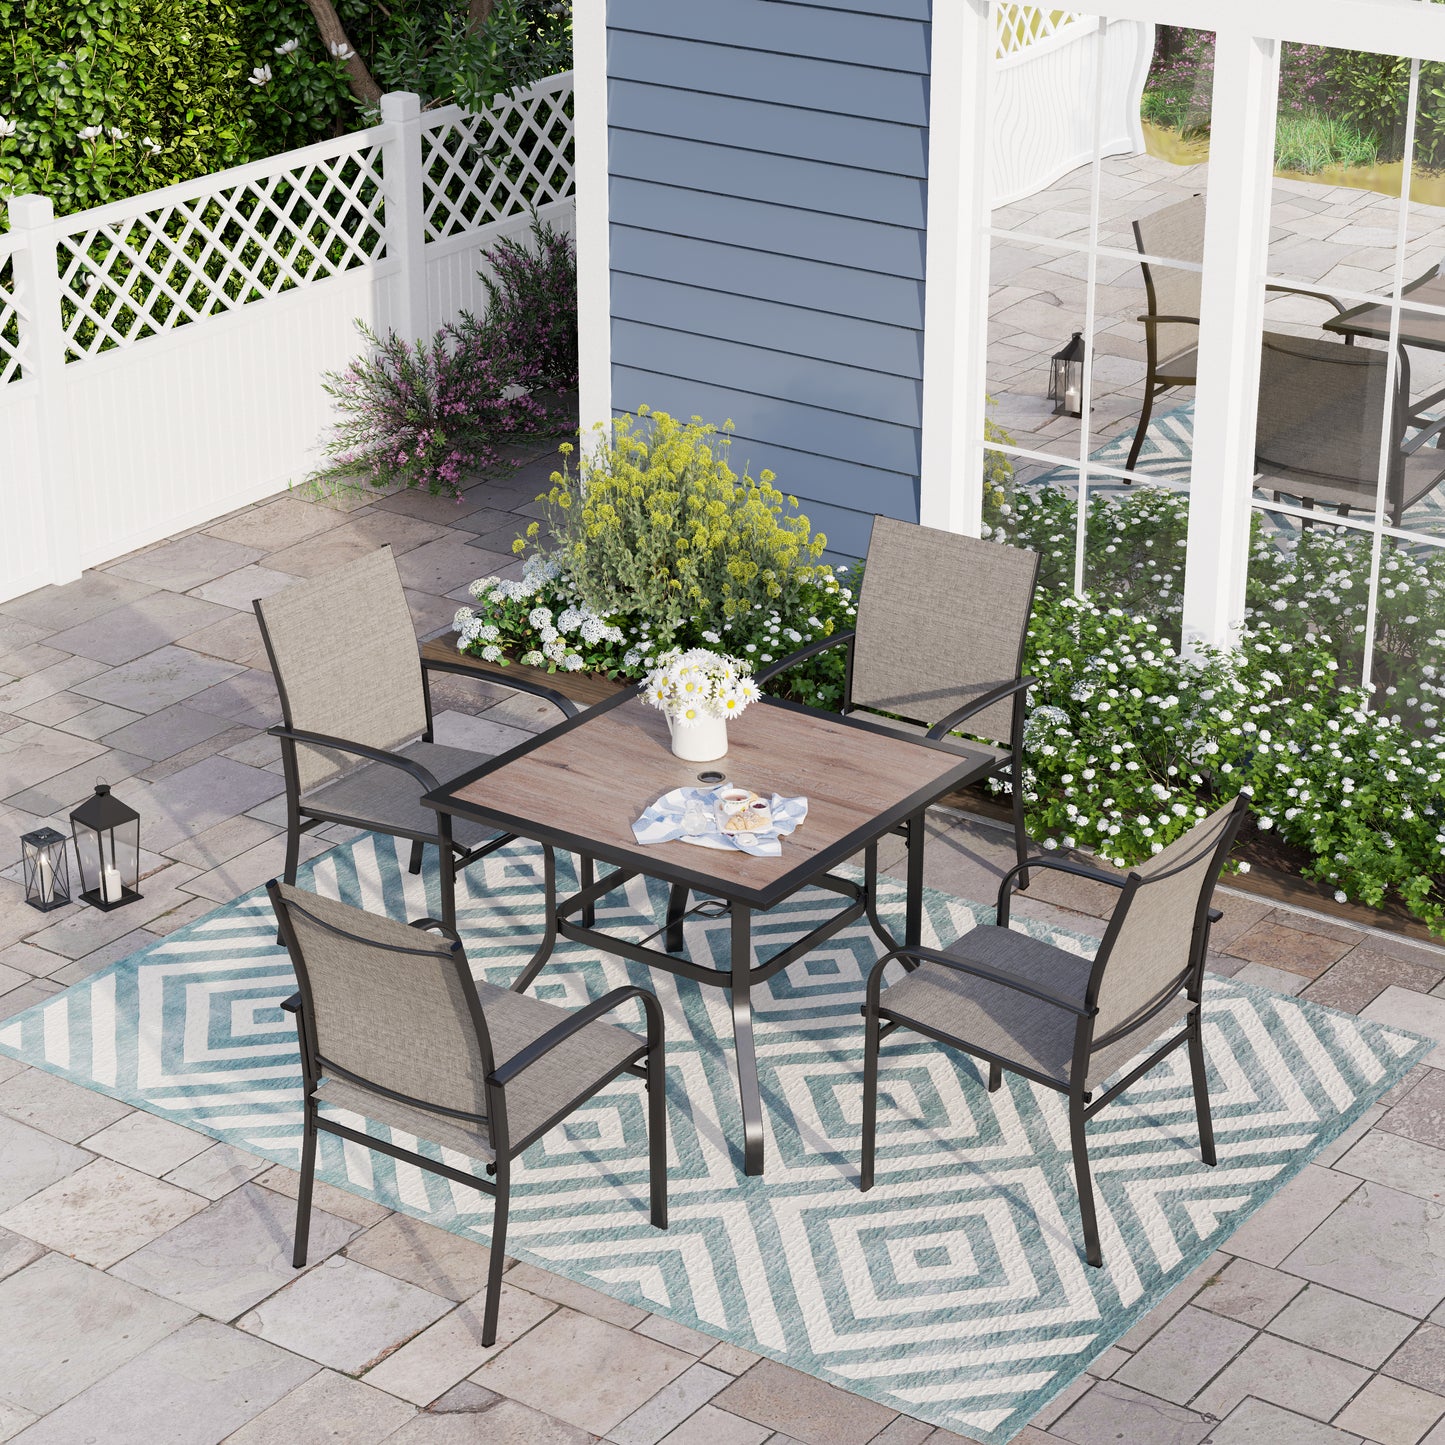 Sophia & William 5 Piece Patio Dining Set Patio Dining Table and 4 Brown Textilene Chairs